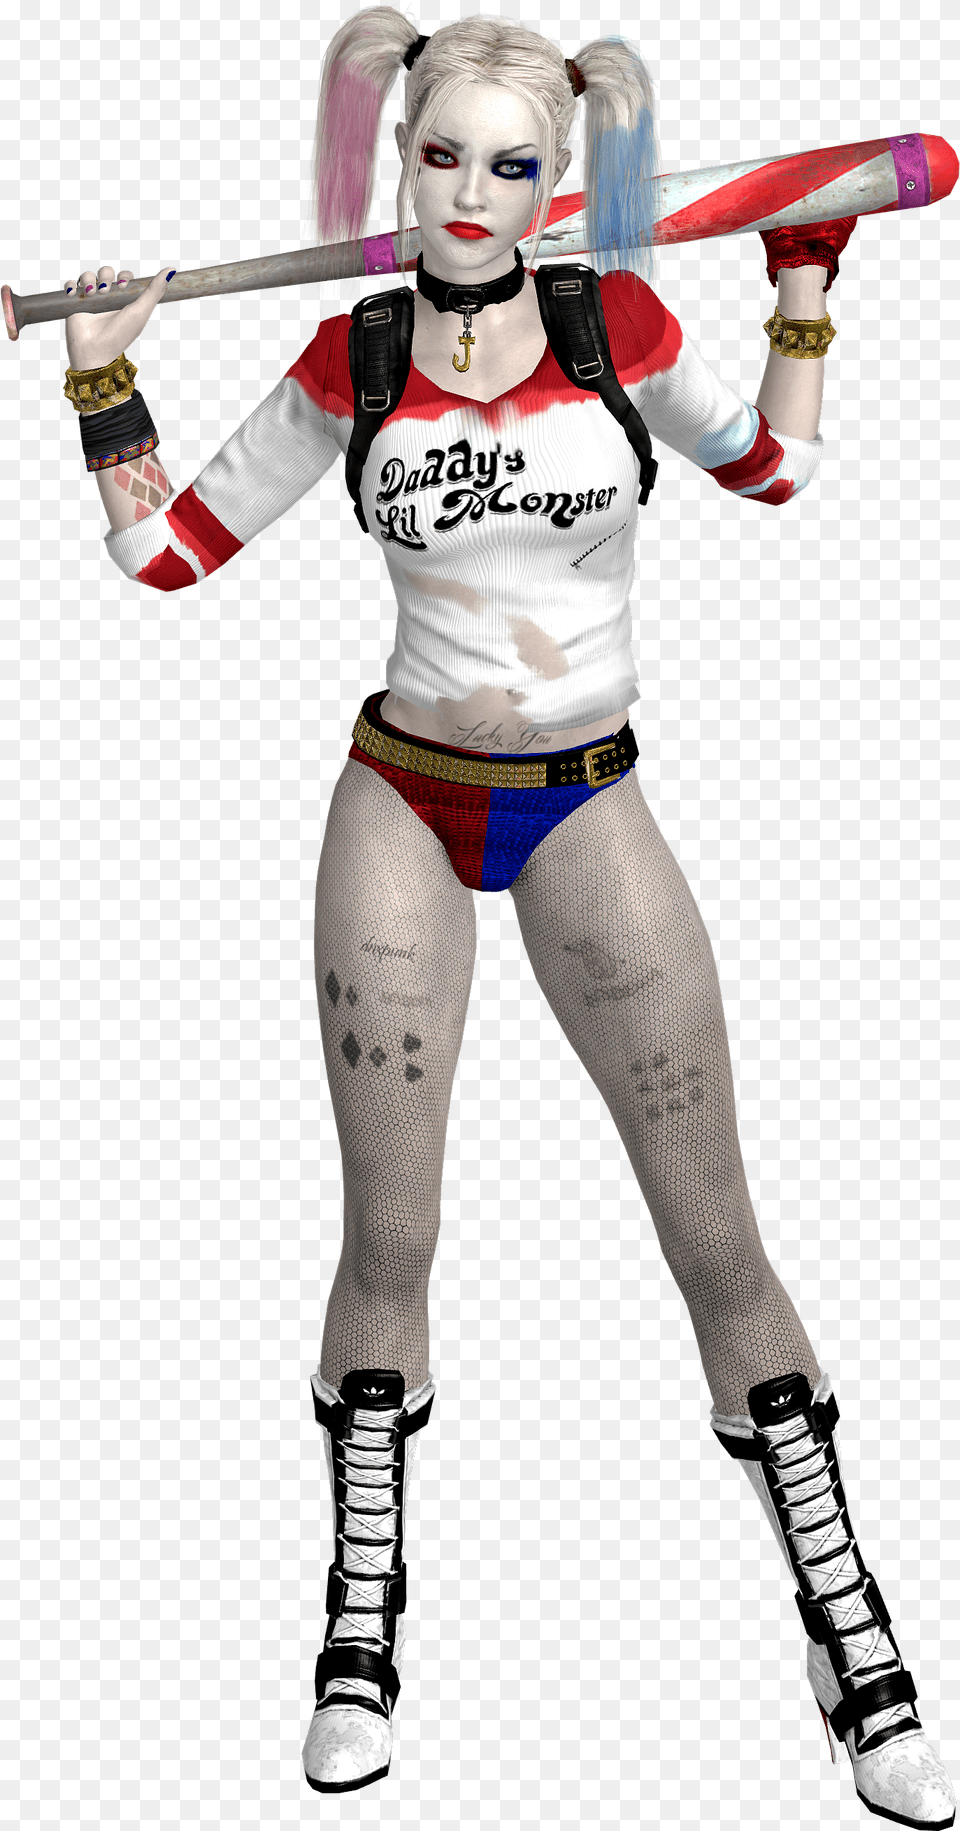 Harley Quinn Suicide Squad Clothing, Costume, Teen, Female Png Image